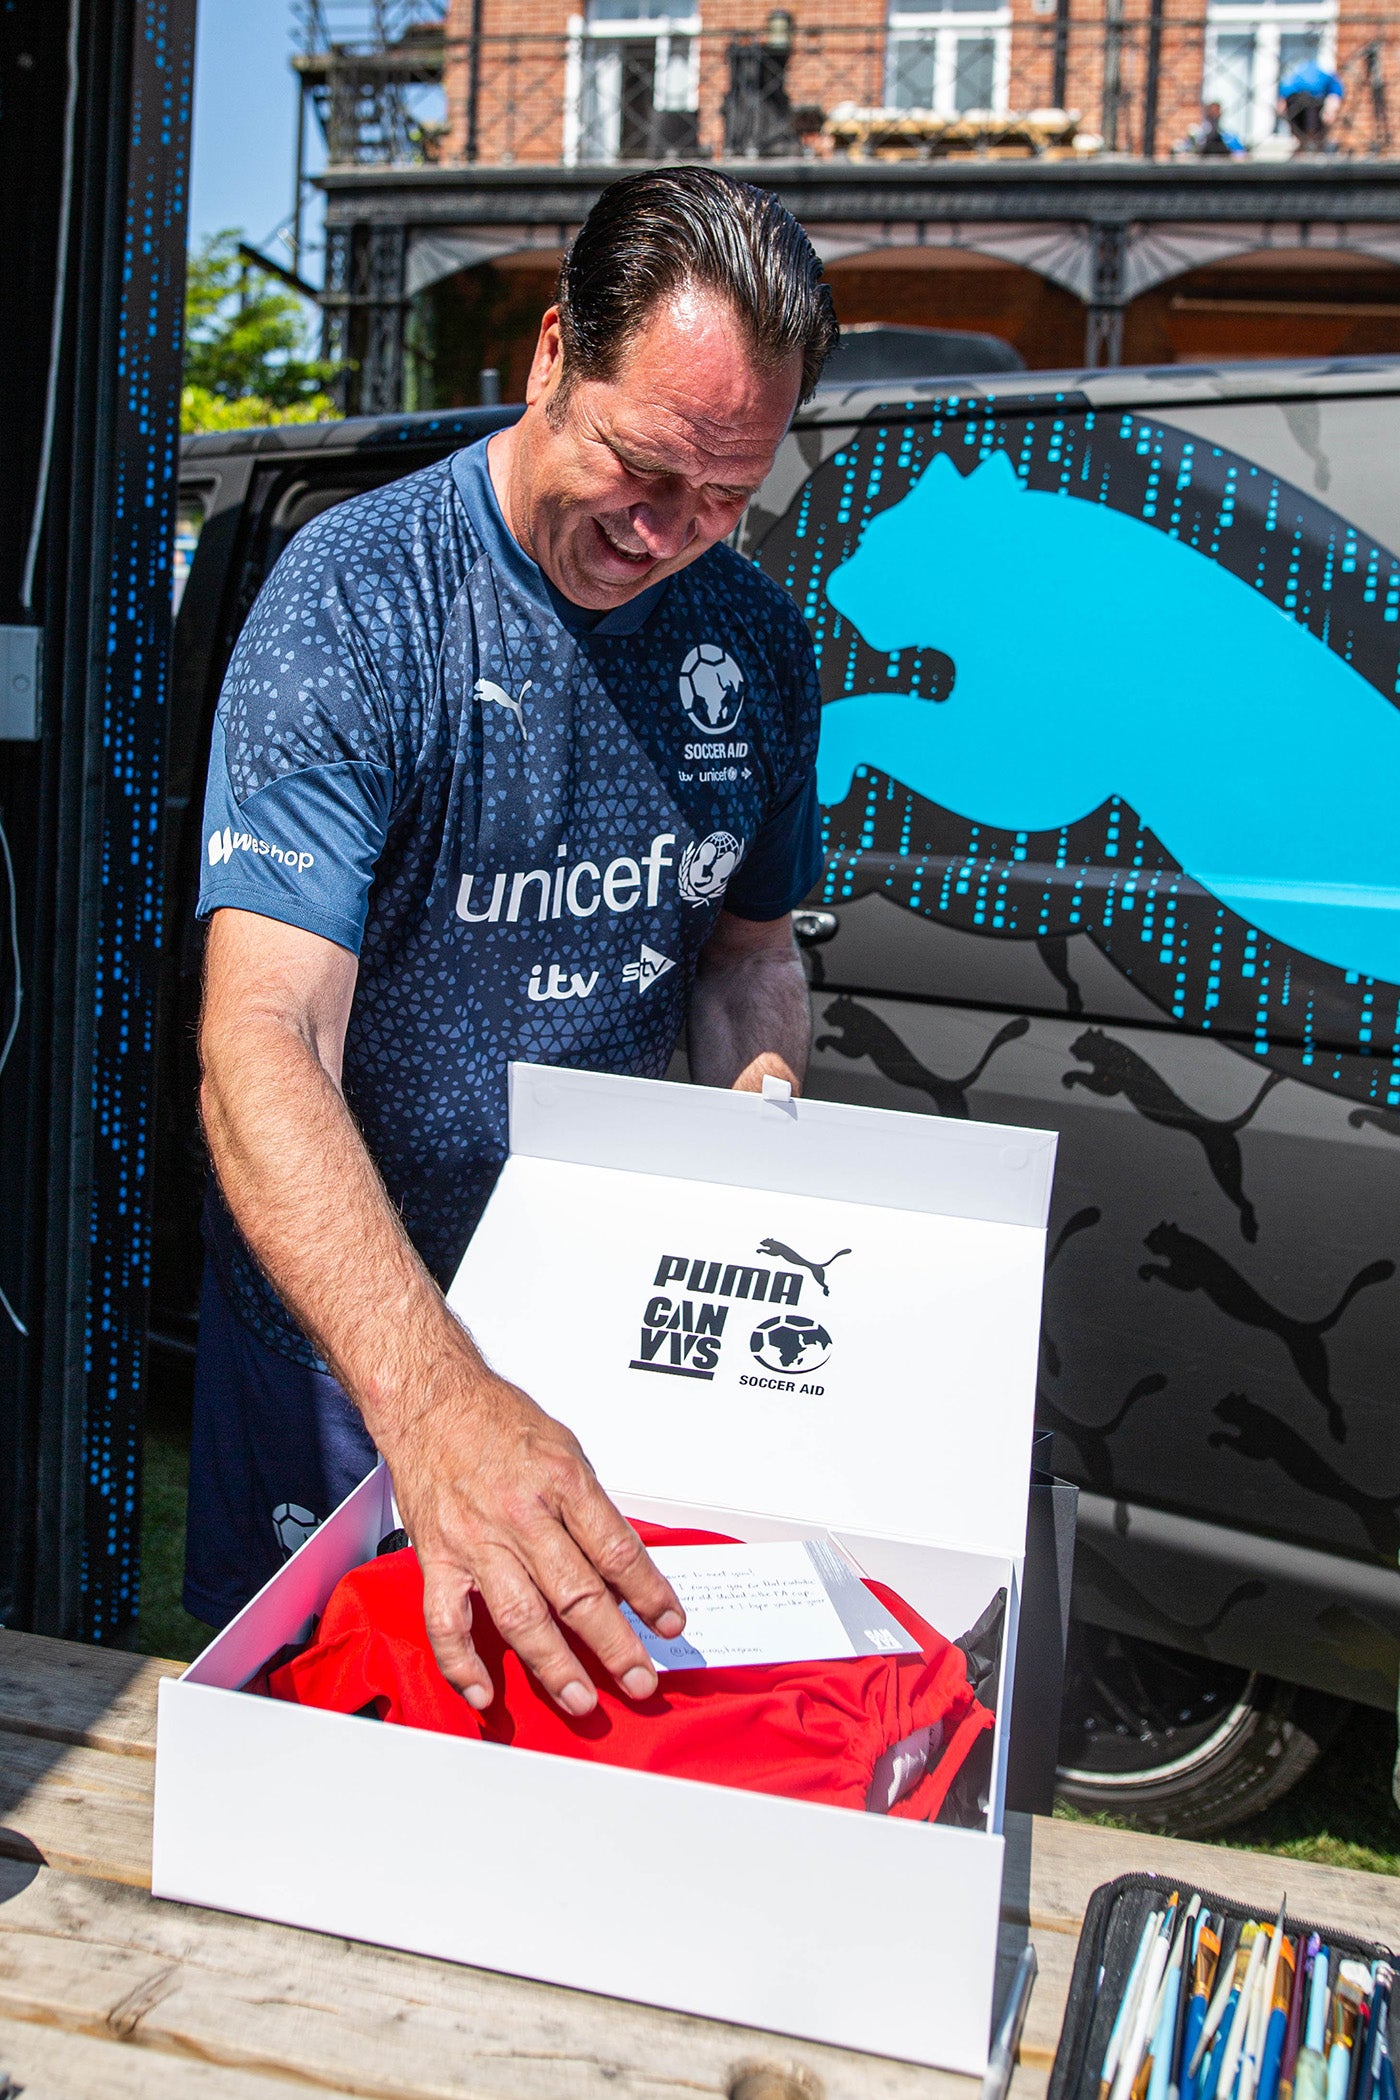 Footballer David Seaman Collects His Custom Sneakers From The Canvvs Stand